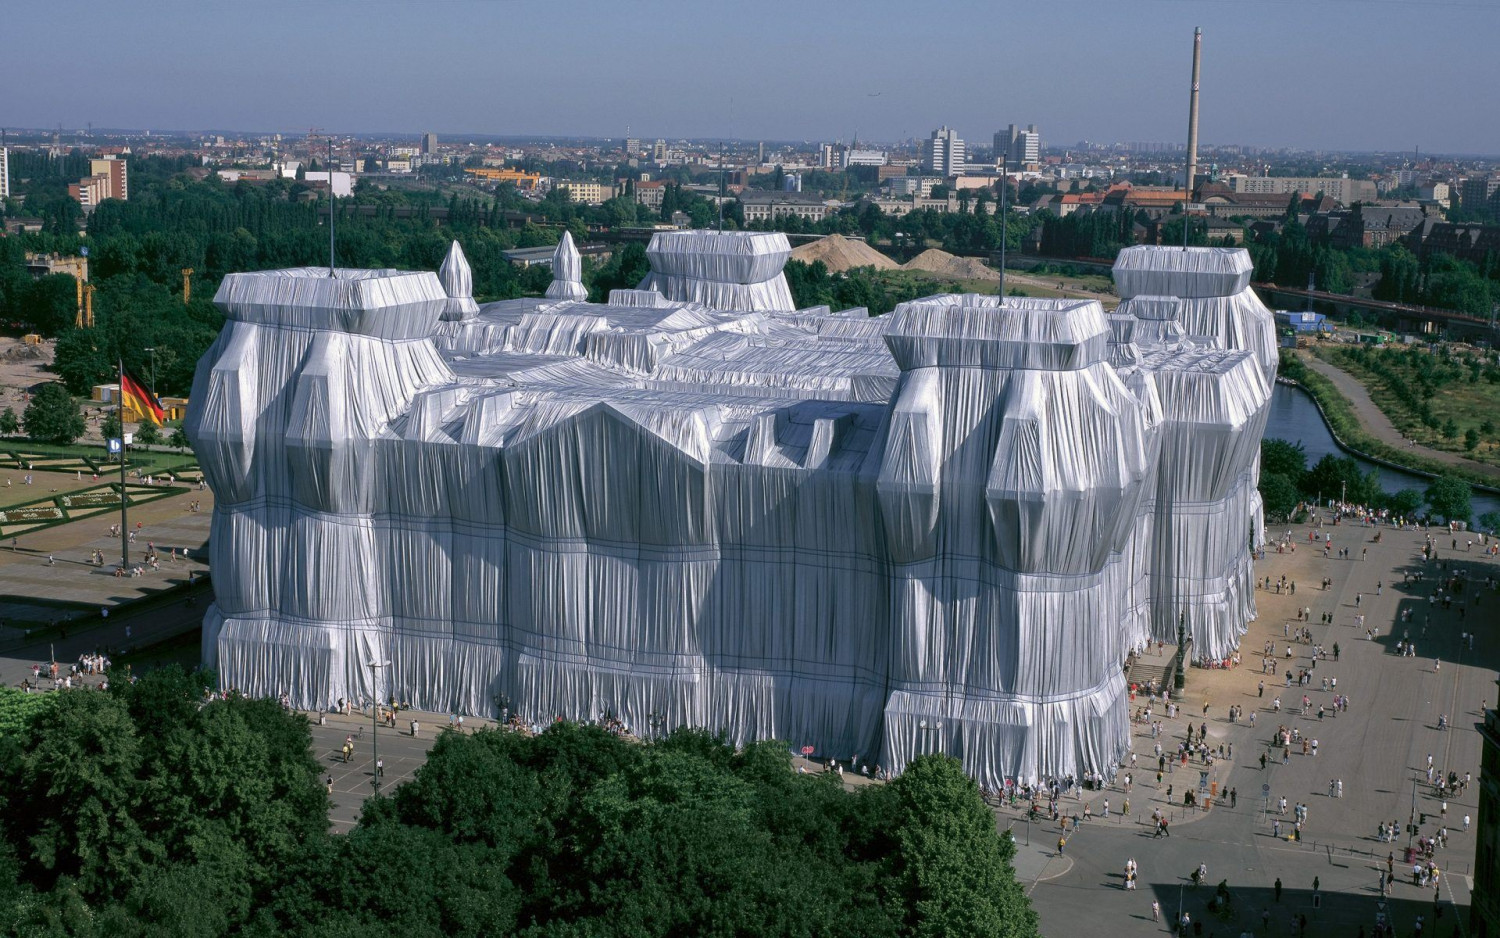 “Reichstag bọc vải” (Wrapped Reichstag) ở Berlin (1995) - Ảnh: Wolfgang Volz